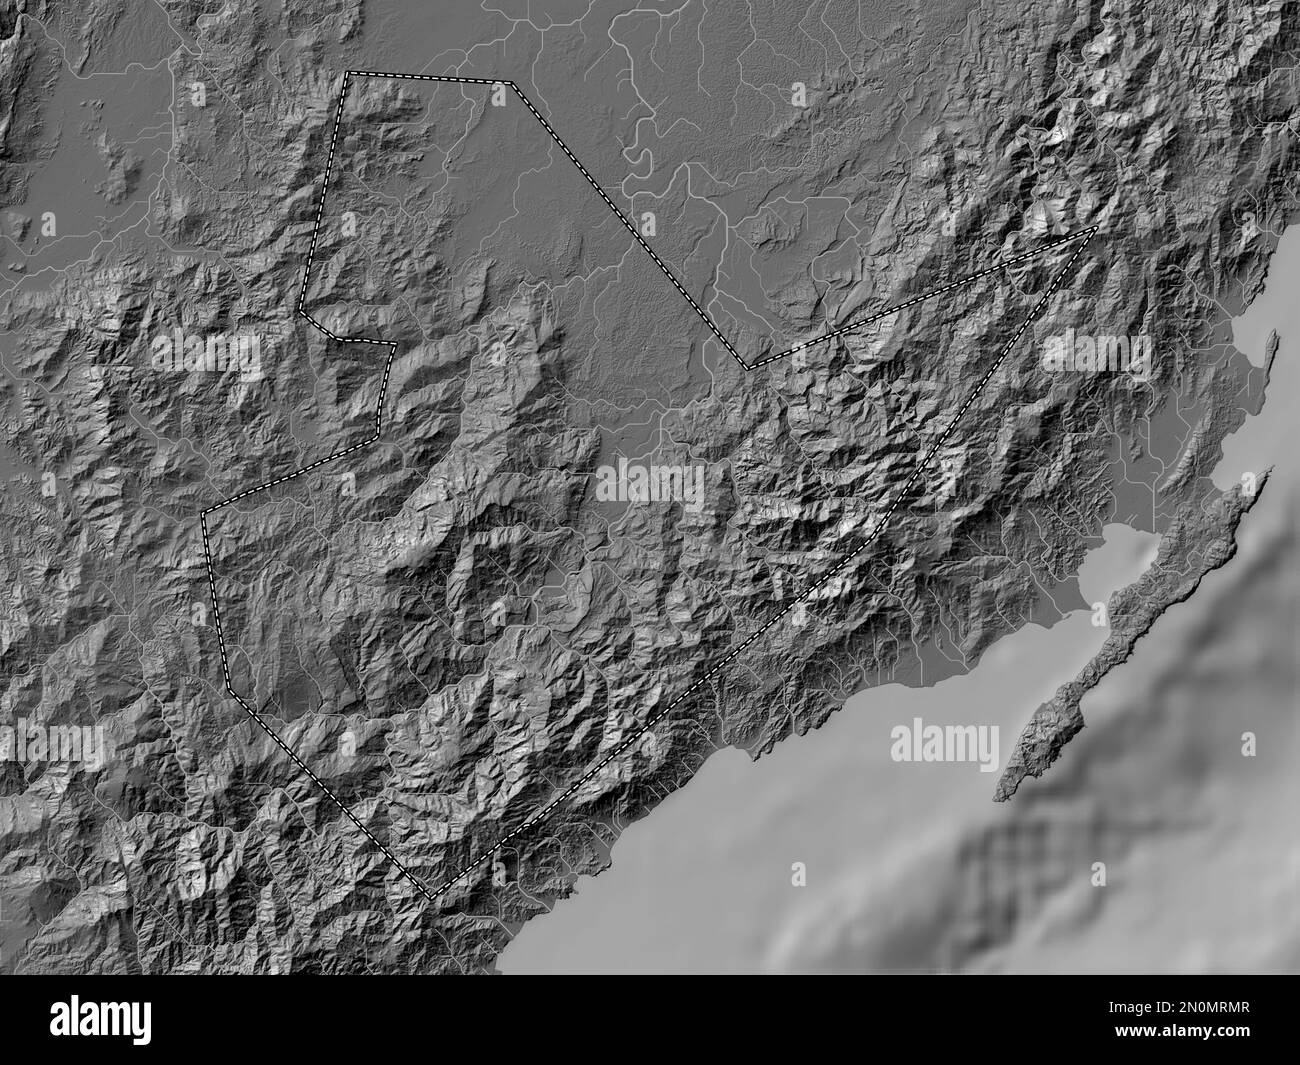 Quirino, province of Philippines. Bilevel elevation map with lakes and rivers Stock Photo